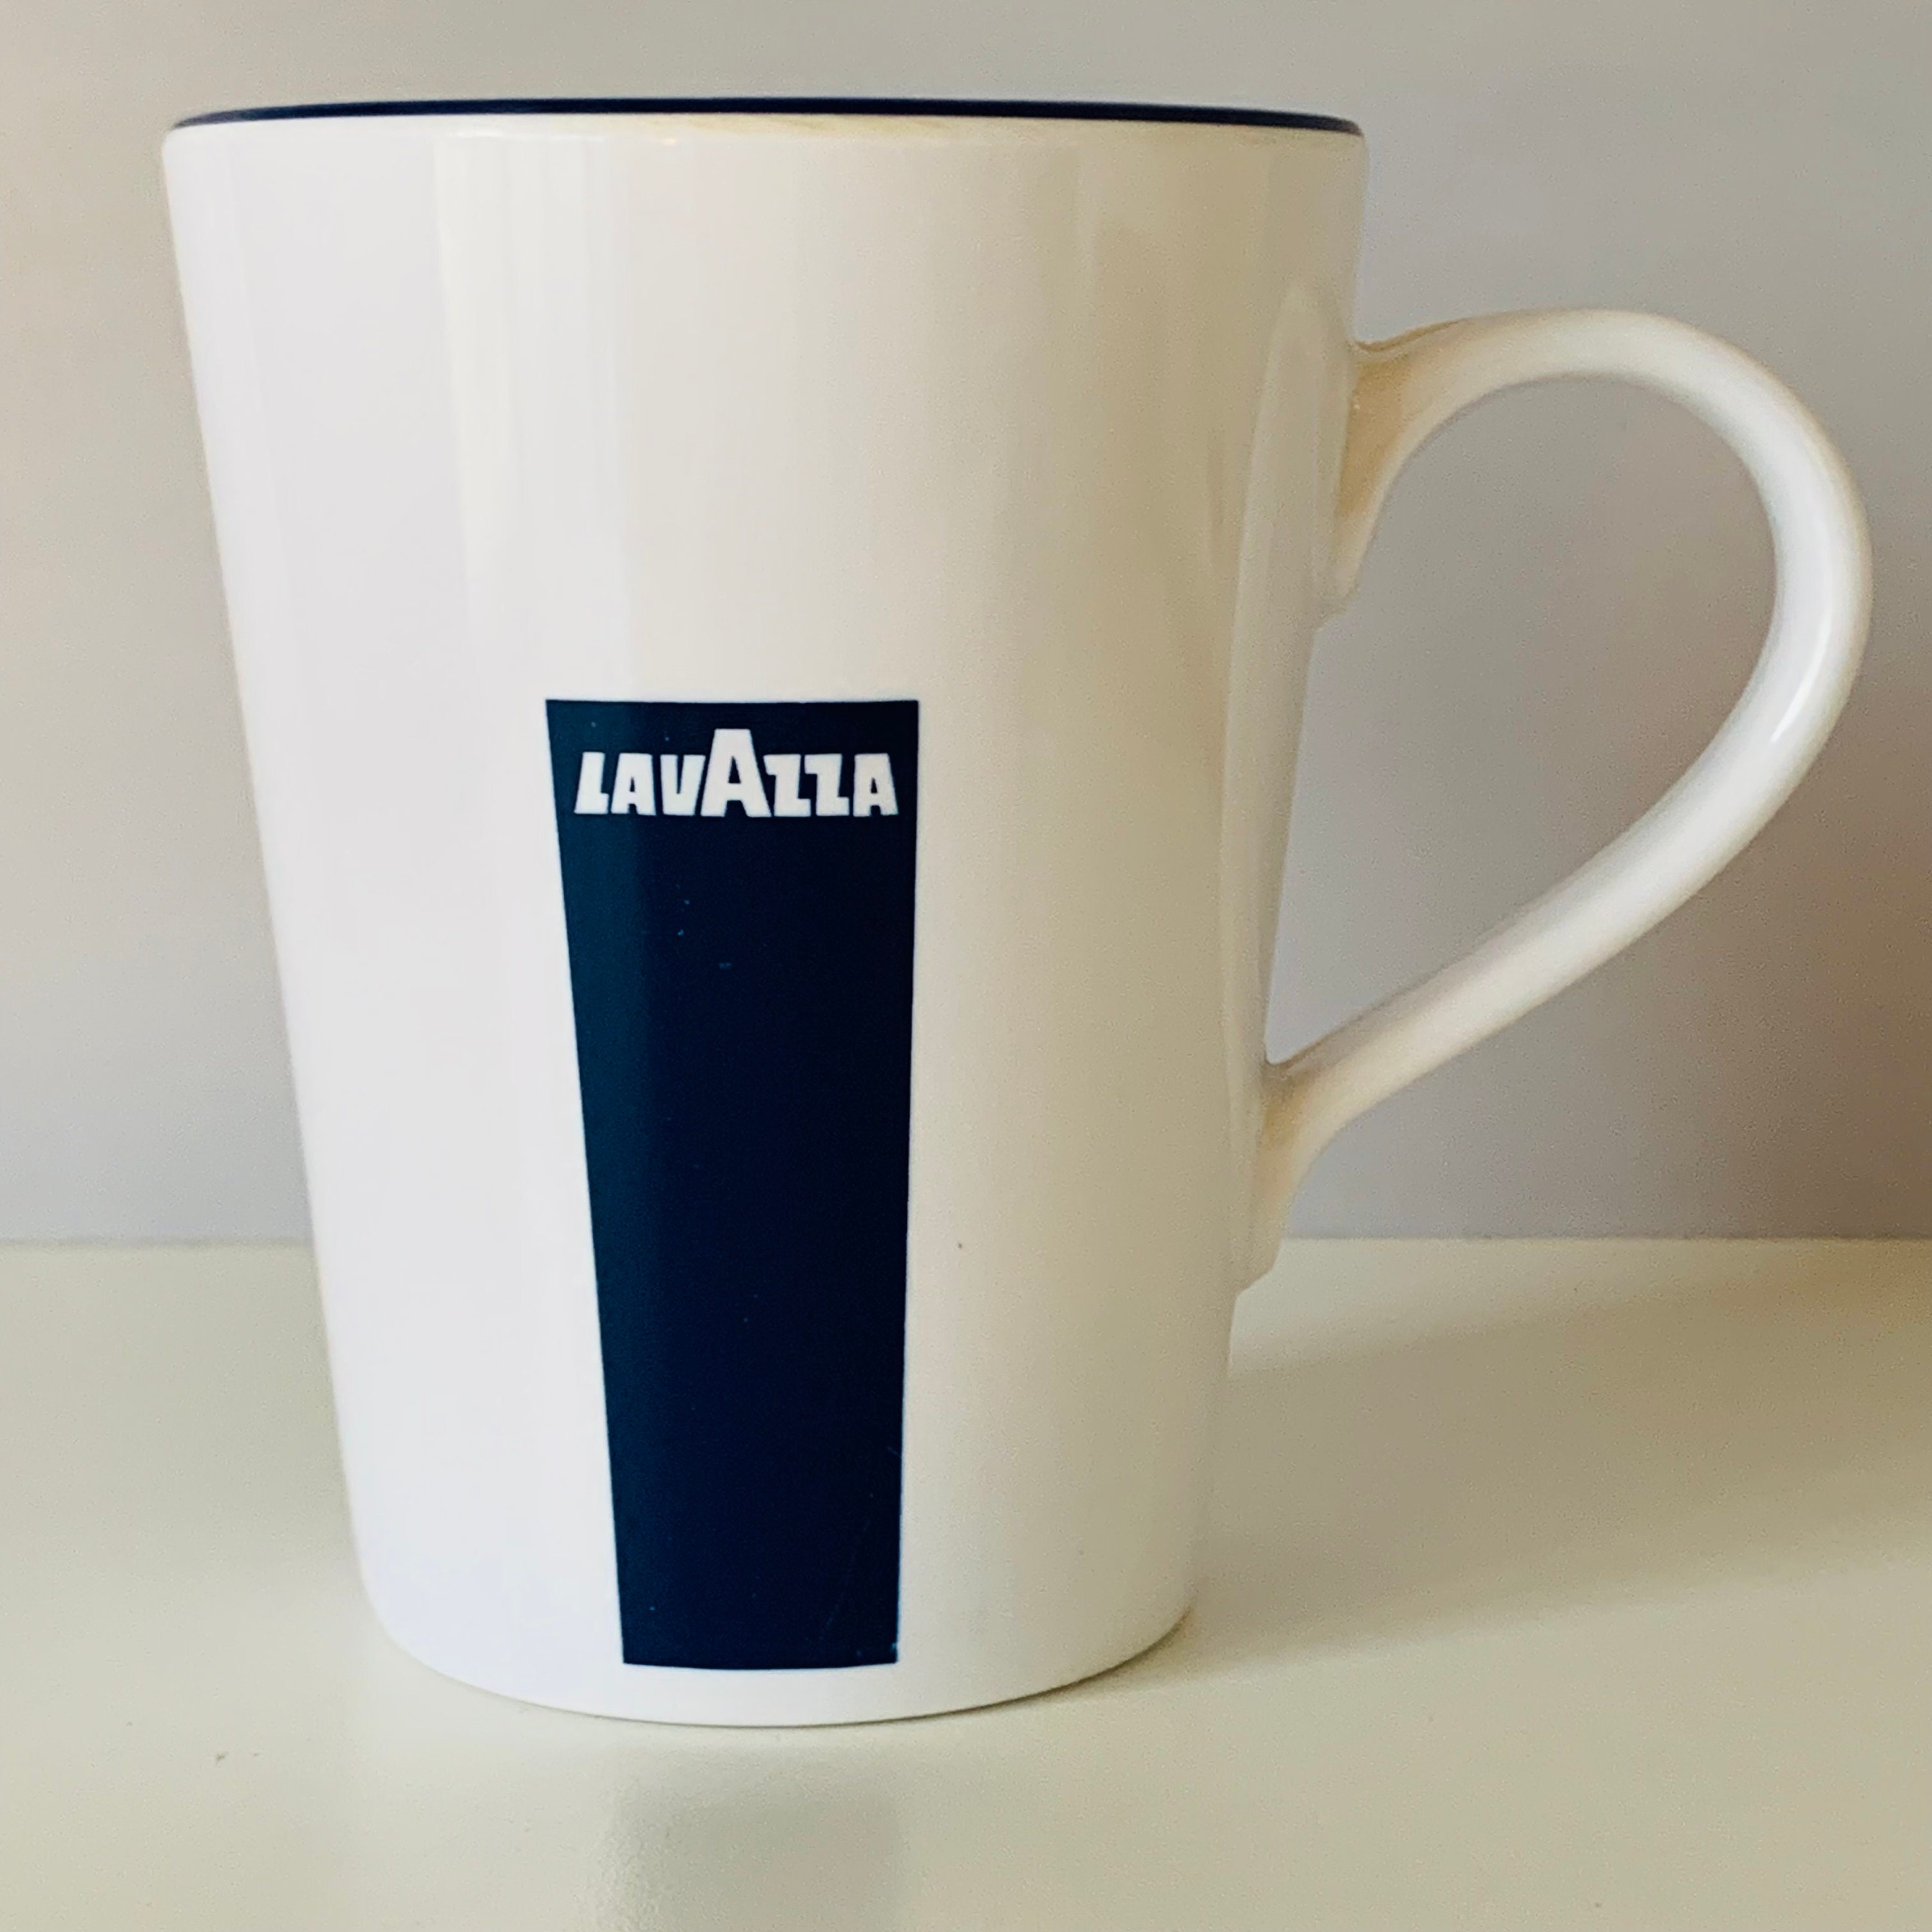 Lavazza Paper Cups – Italy Best Coffee